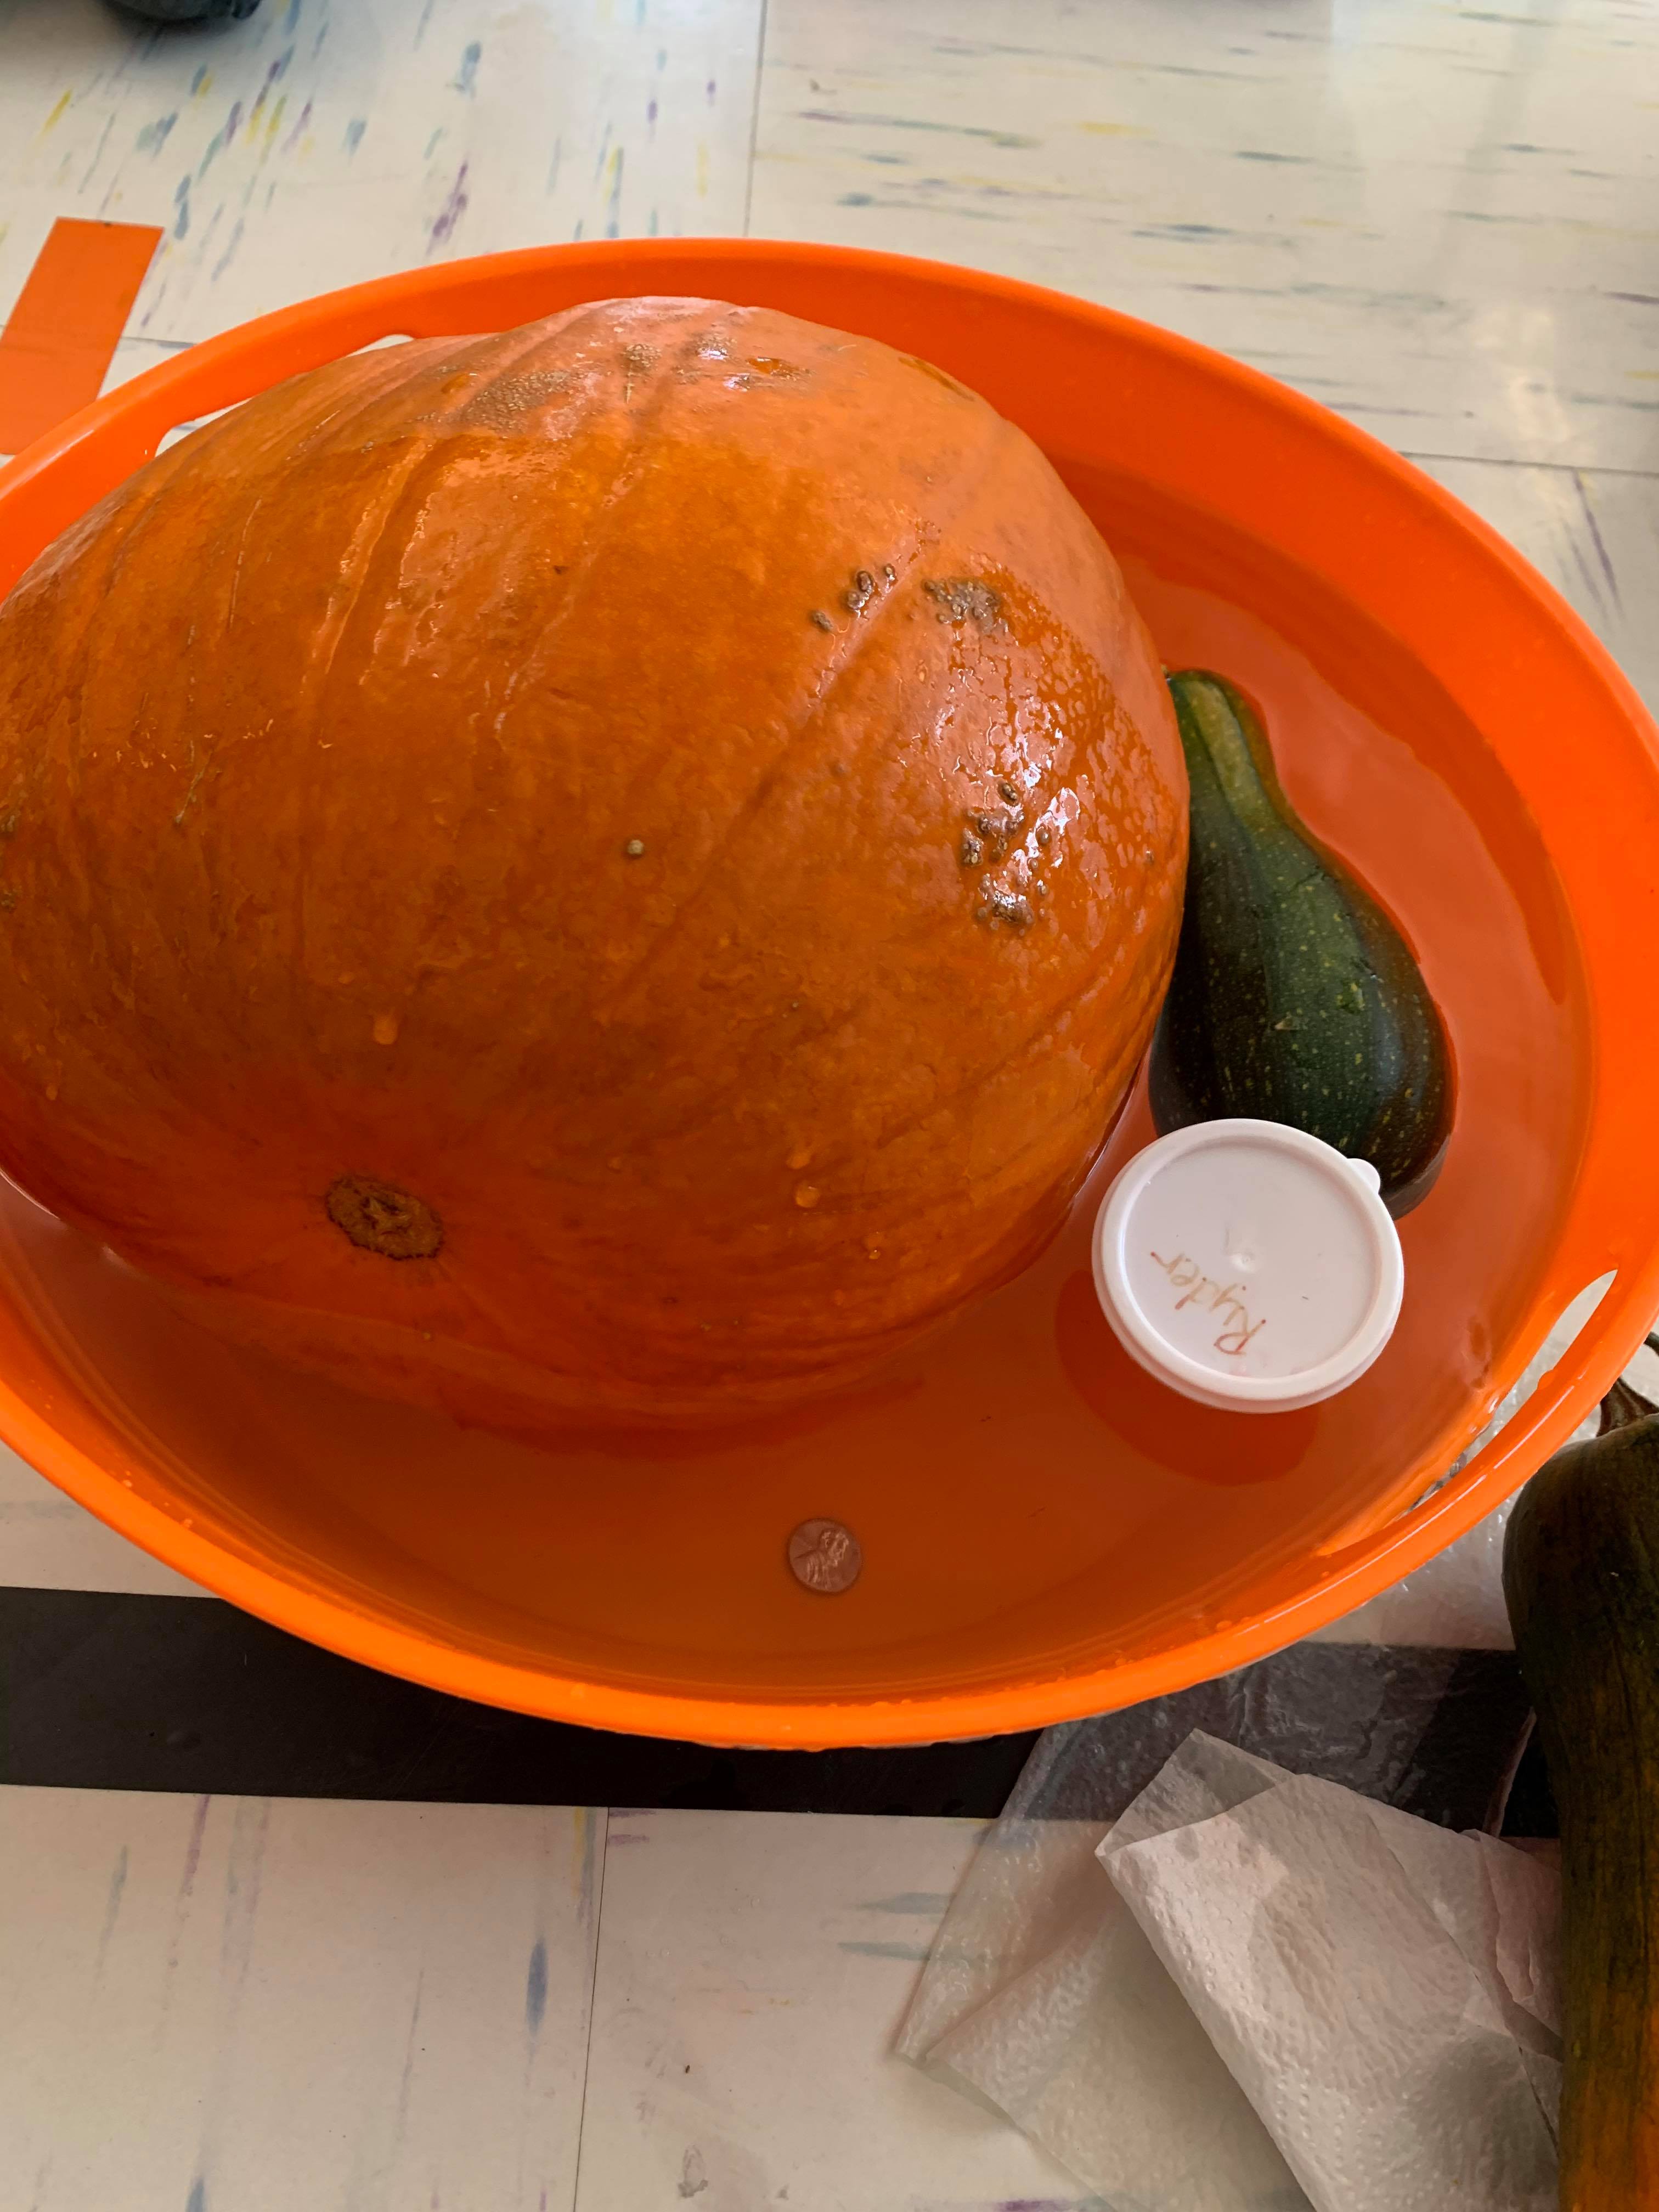 Floating/Sinking Objects - A tiny penny sinks, while a huge pumpkin floats!